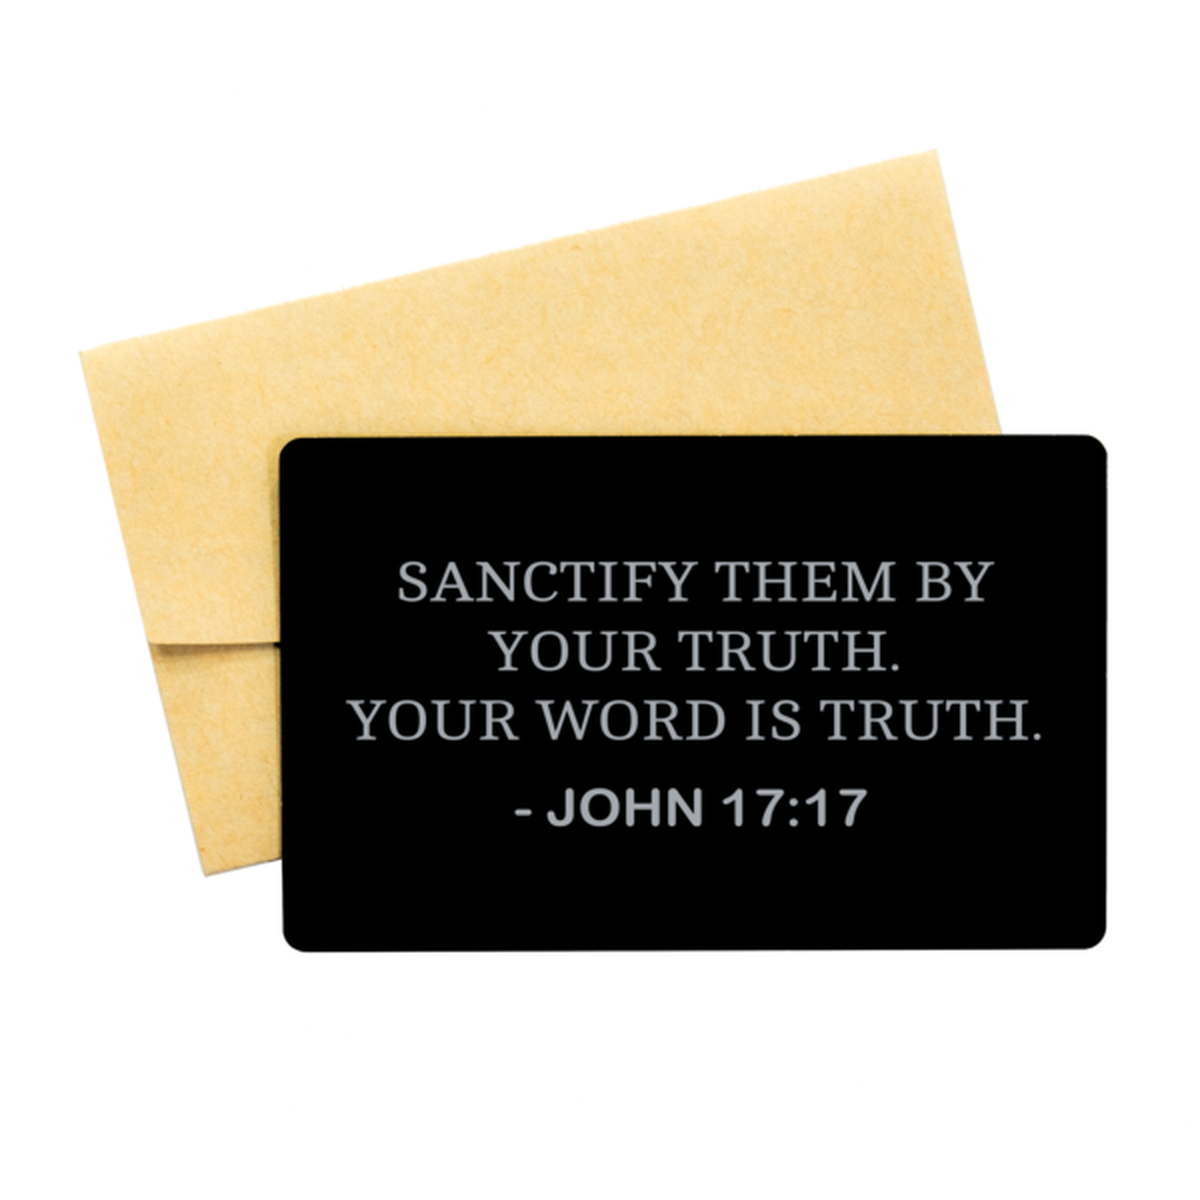 Bible Verse Card, John 17:17 Sanctify Them By Your Truth. Your Word Is, Christian Inspirational Wallet Insert Gifts For Men Women